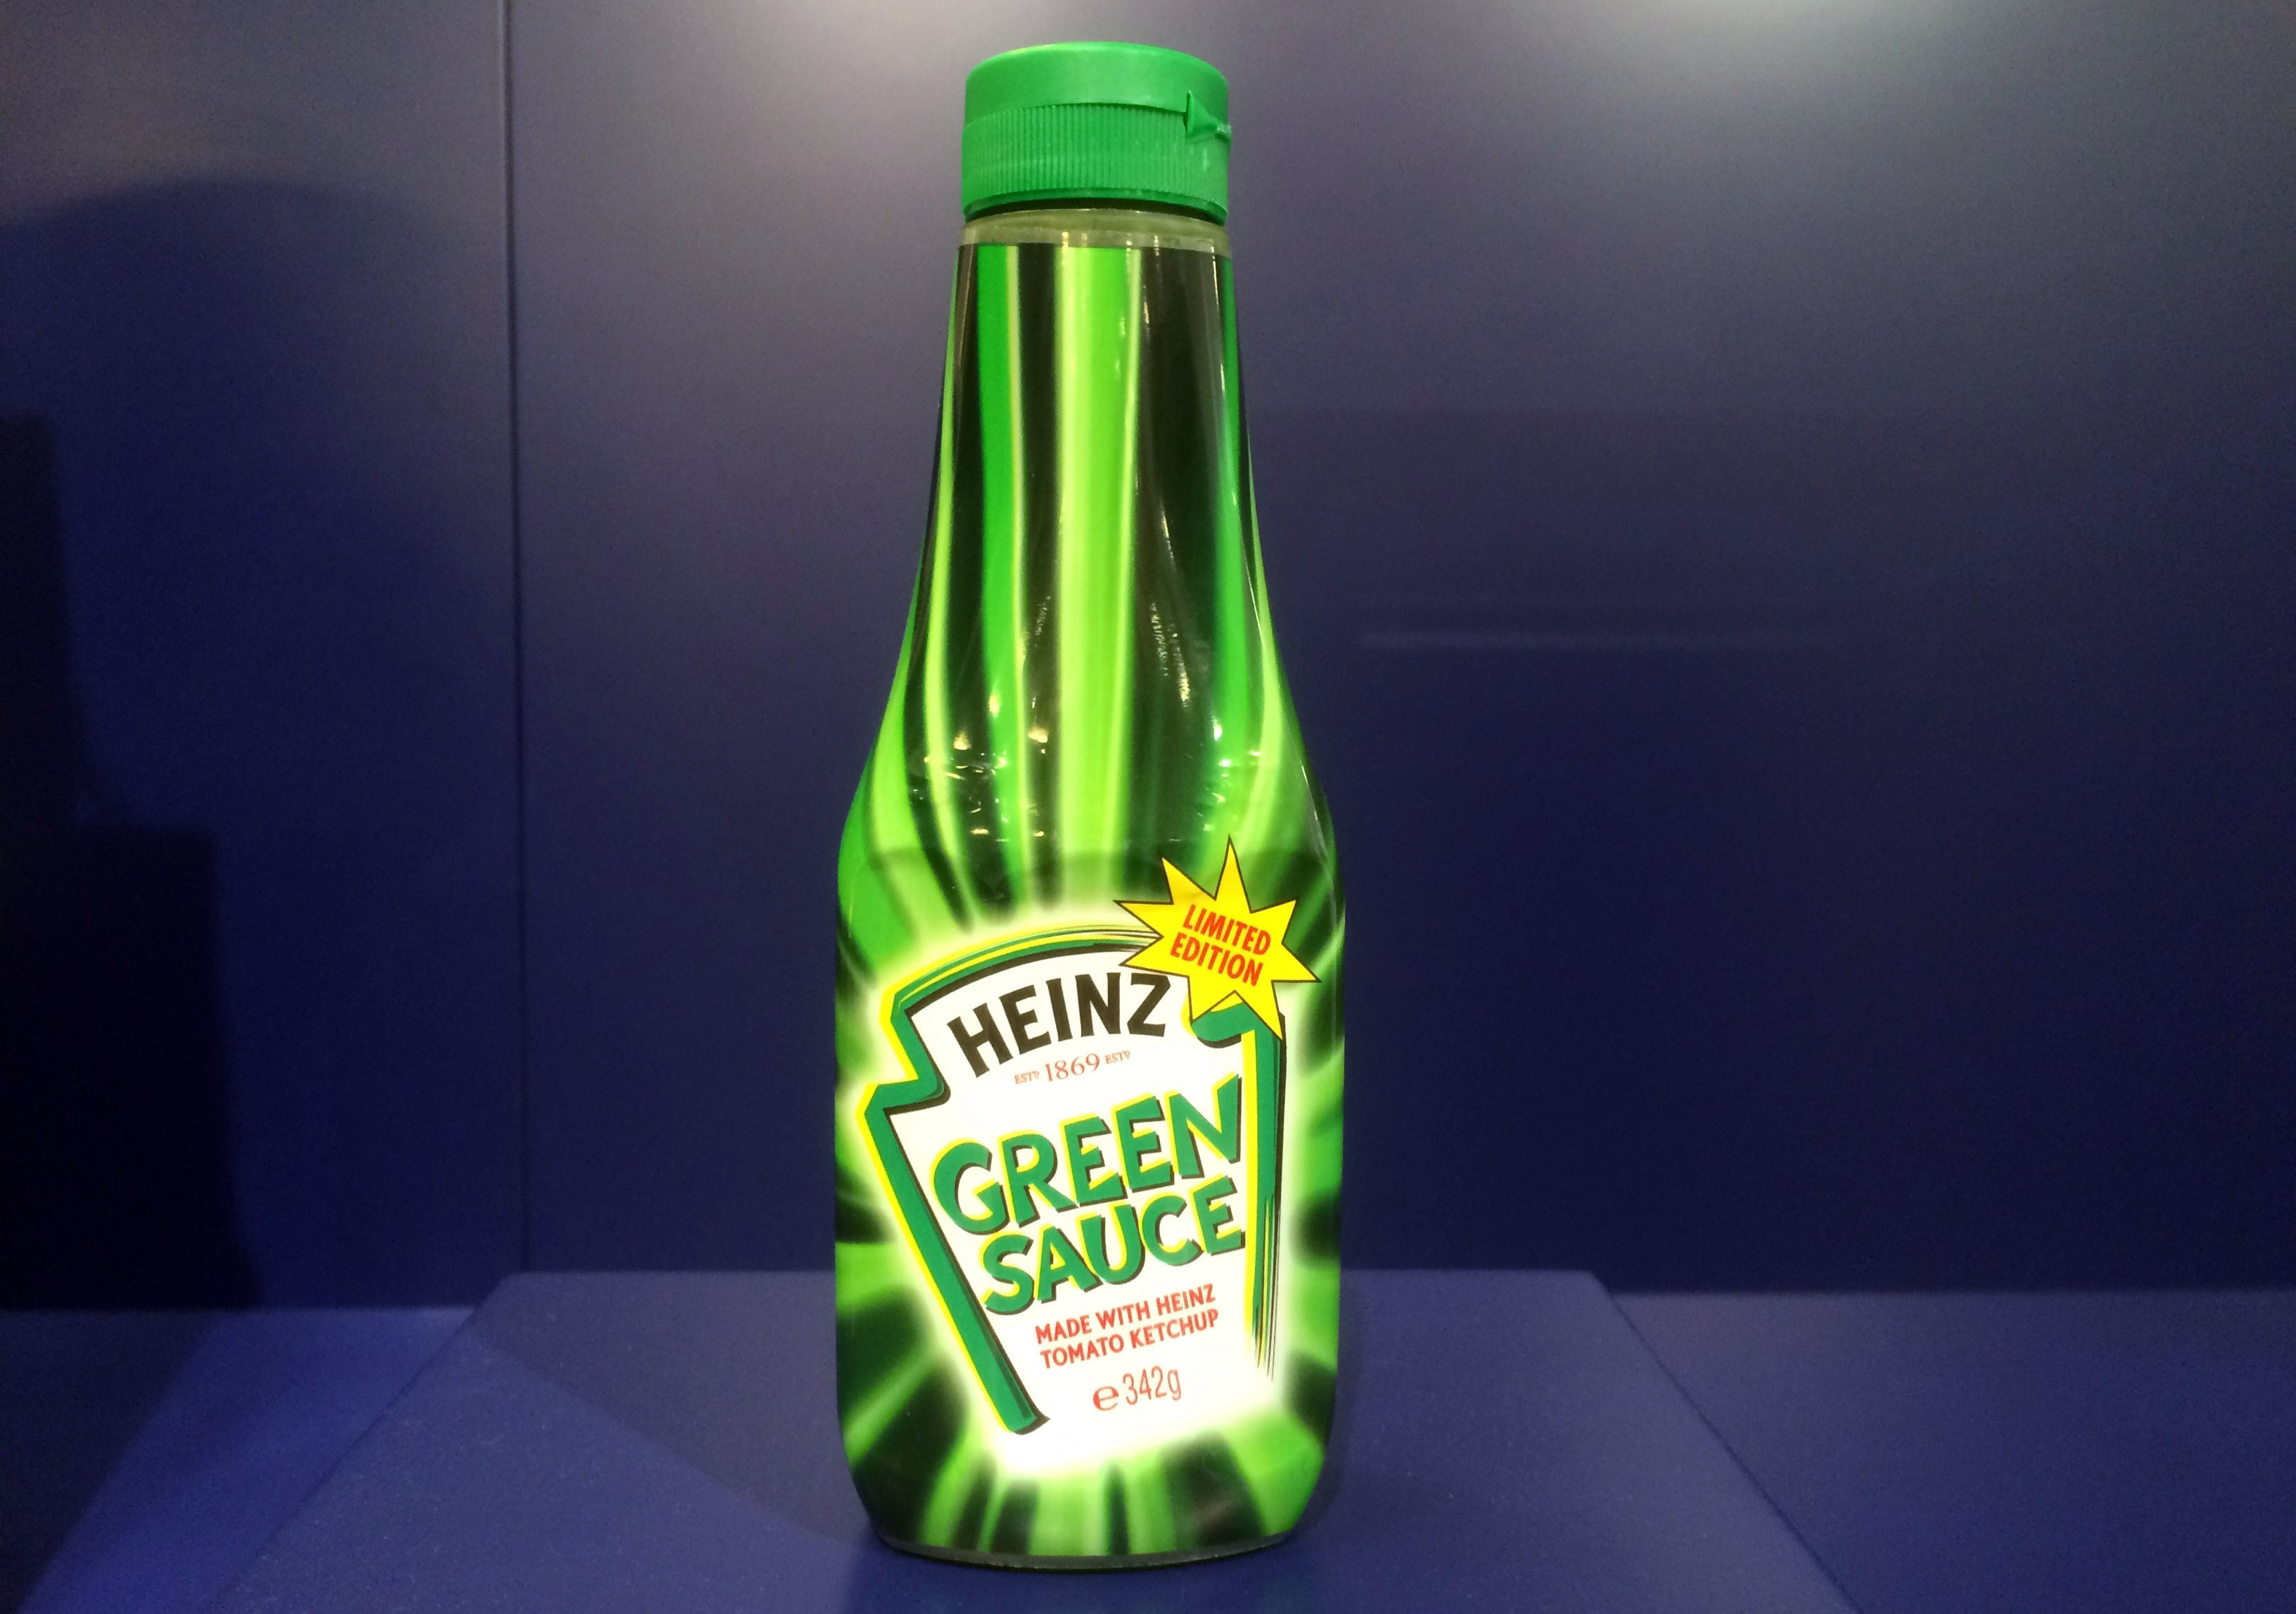 In this photo taken on Thursday, June 1, 2017, a bottle of Heinz ‘Green Sauce’ tomato ketchup is on display at the Museum of Failure in Helsingborg, Sweden. [File photo: AP/James Brooks] 